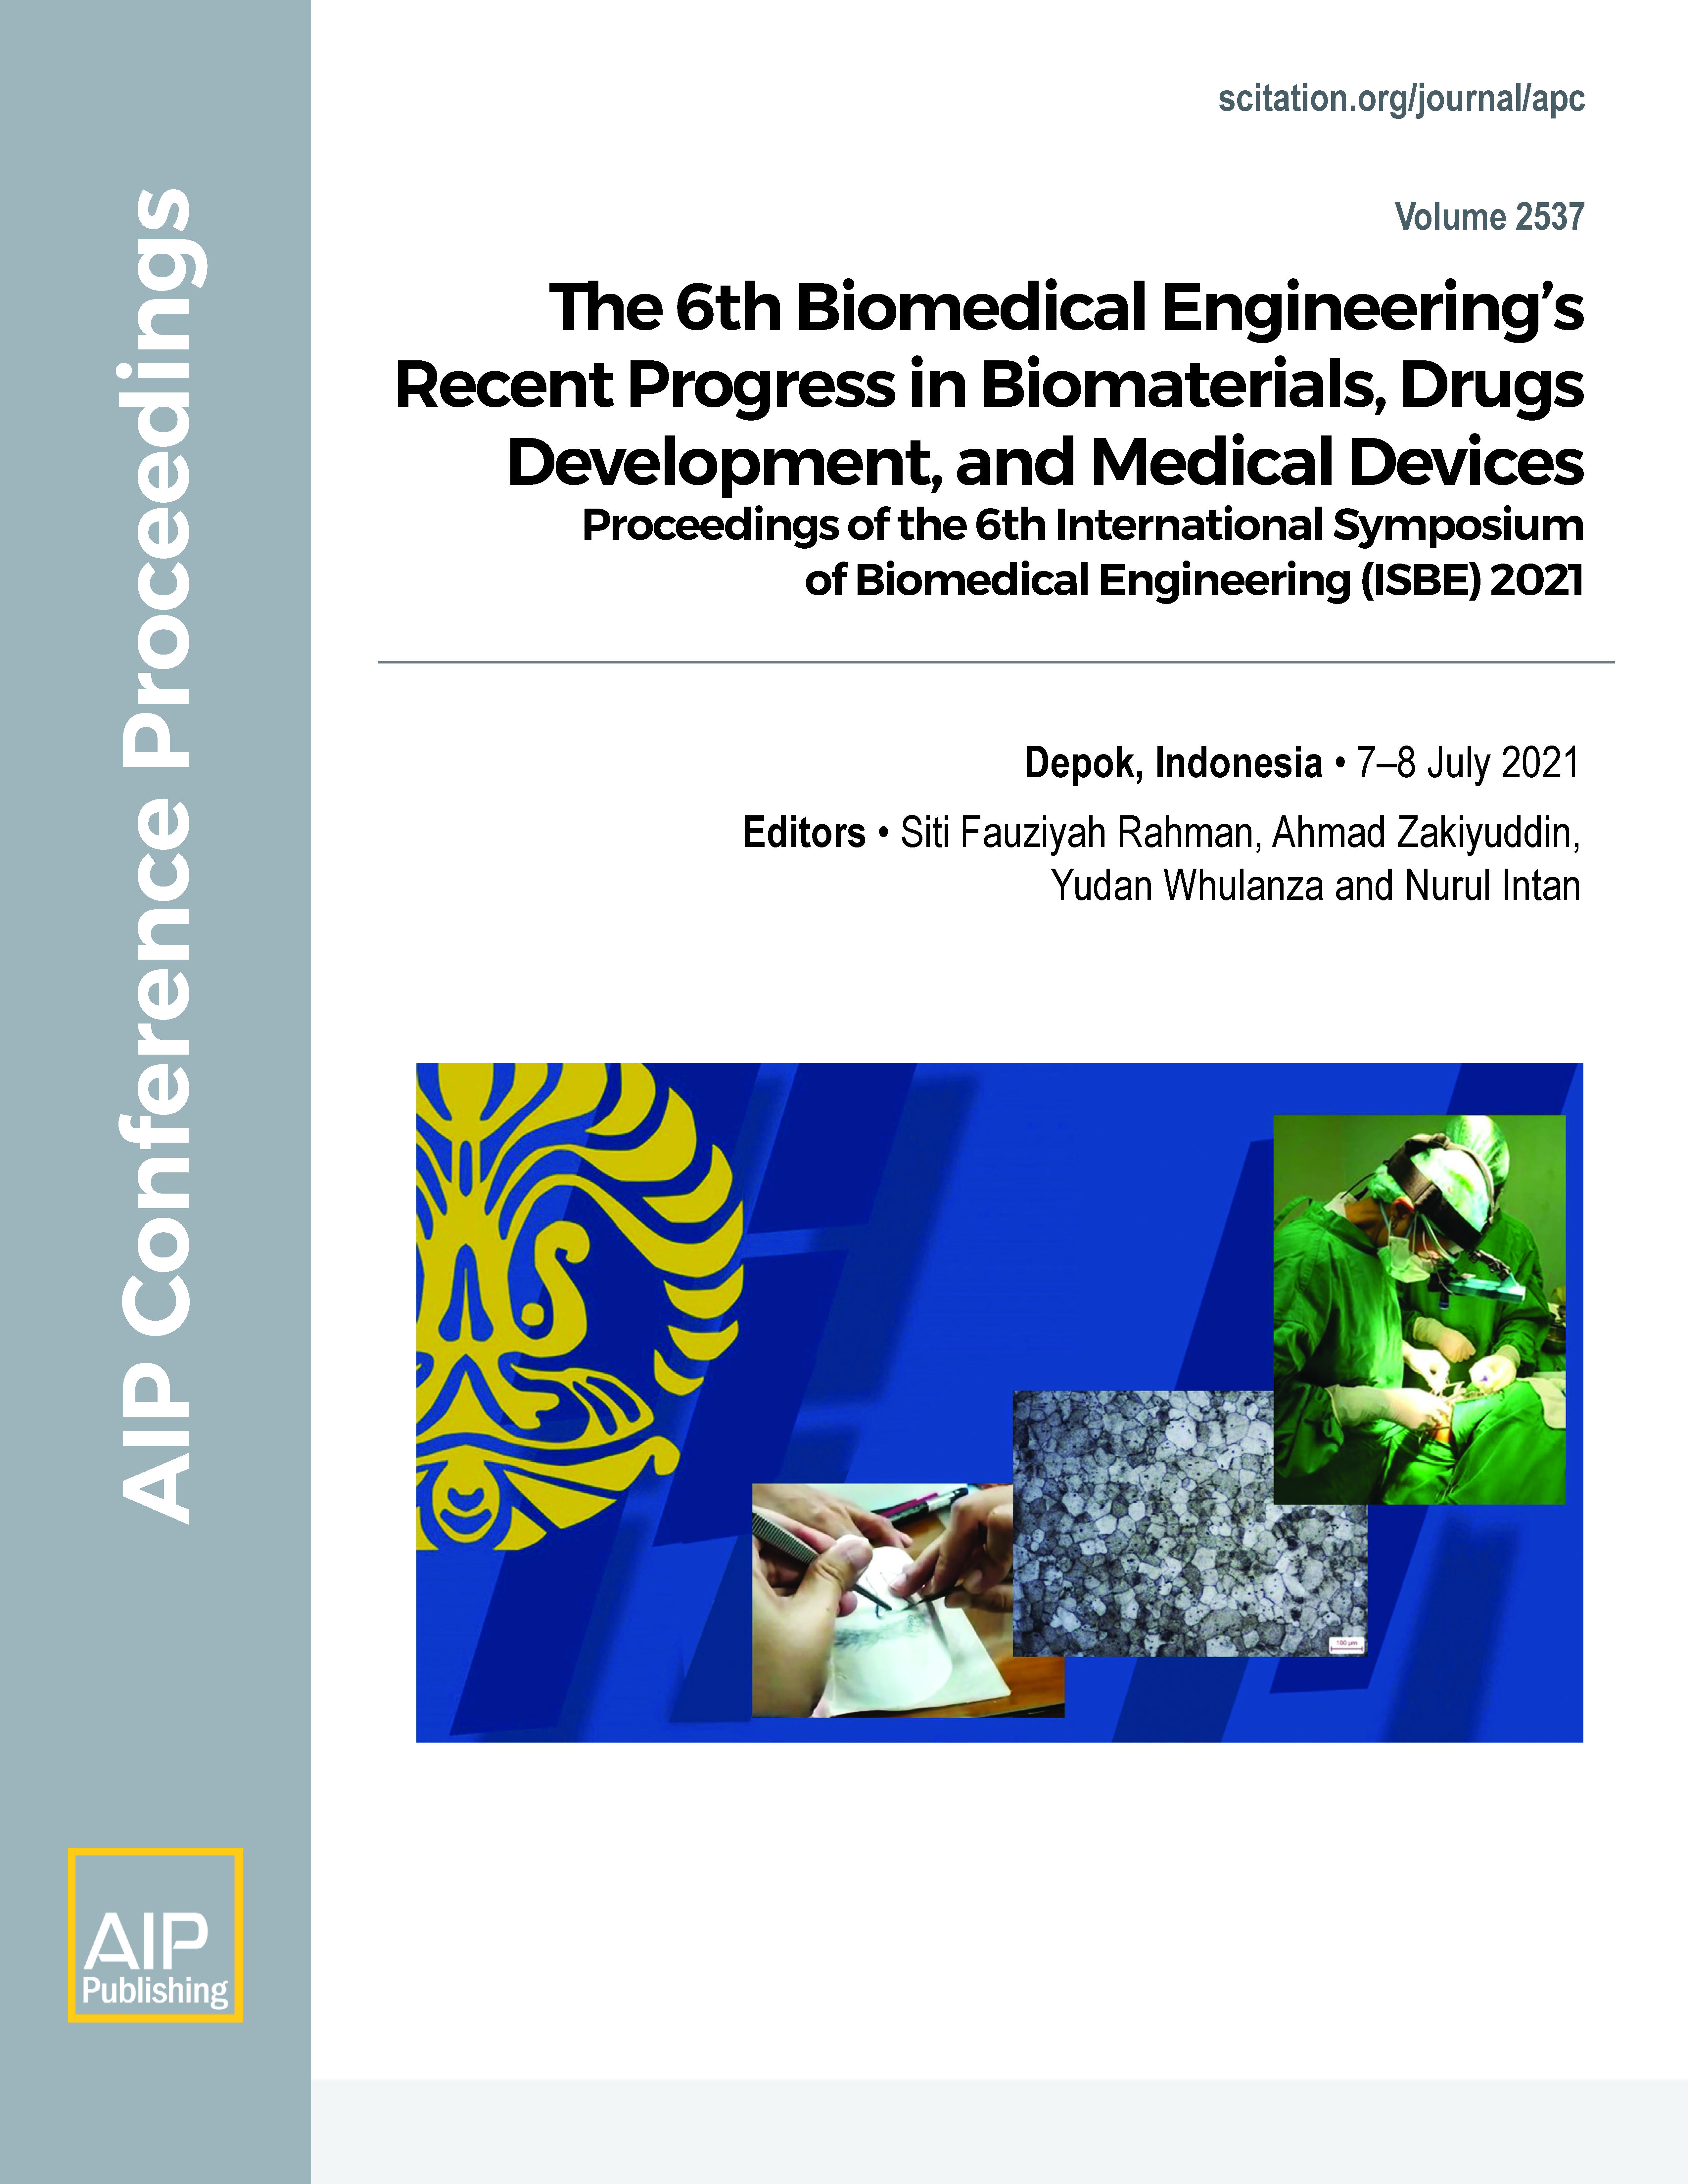 Volume 2537: The 6th Biomedical Engineering's Recent Progress in